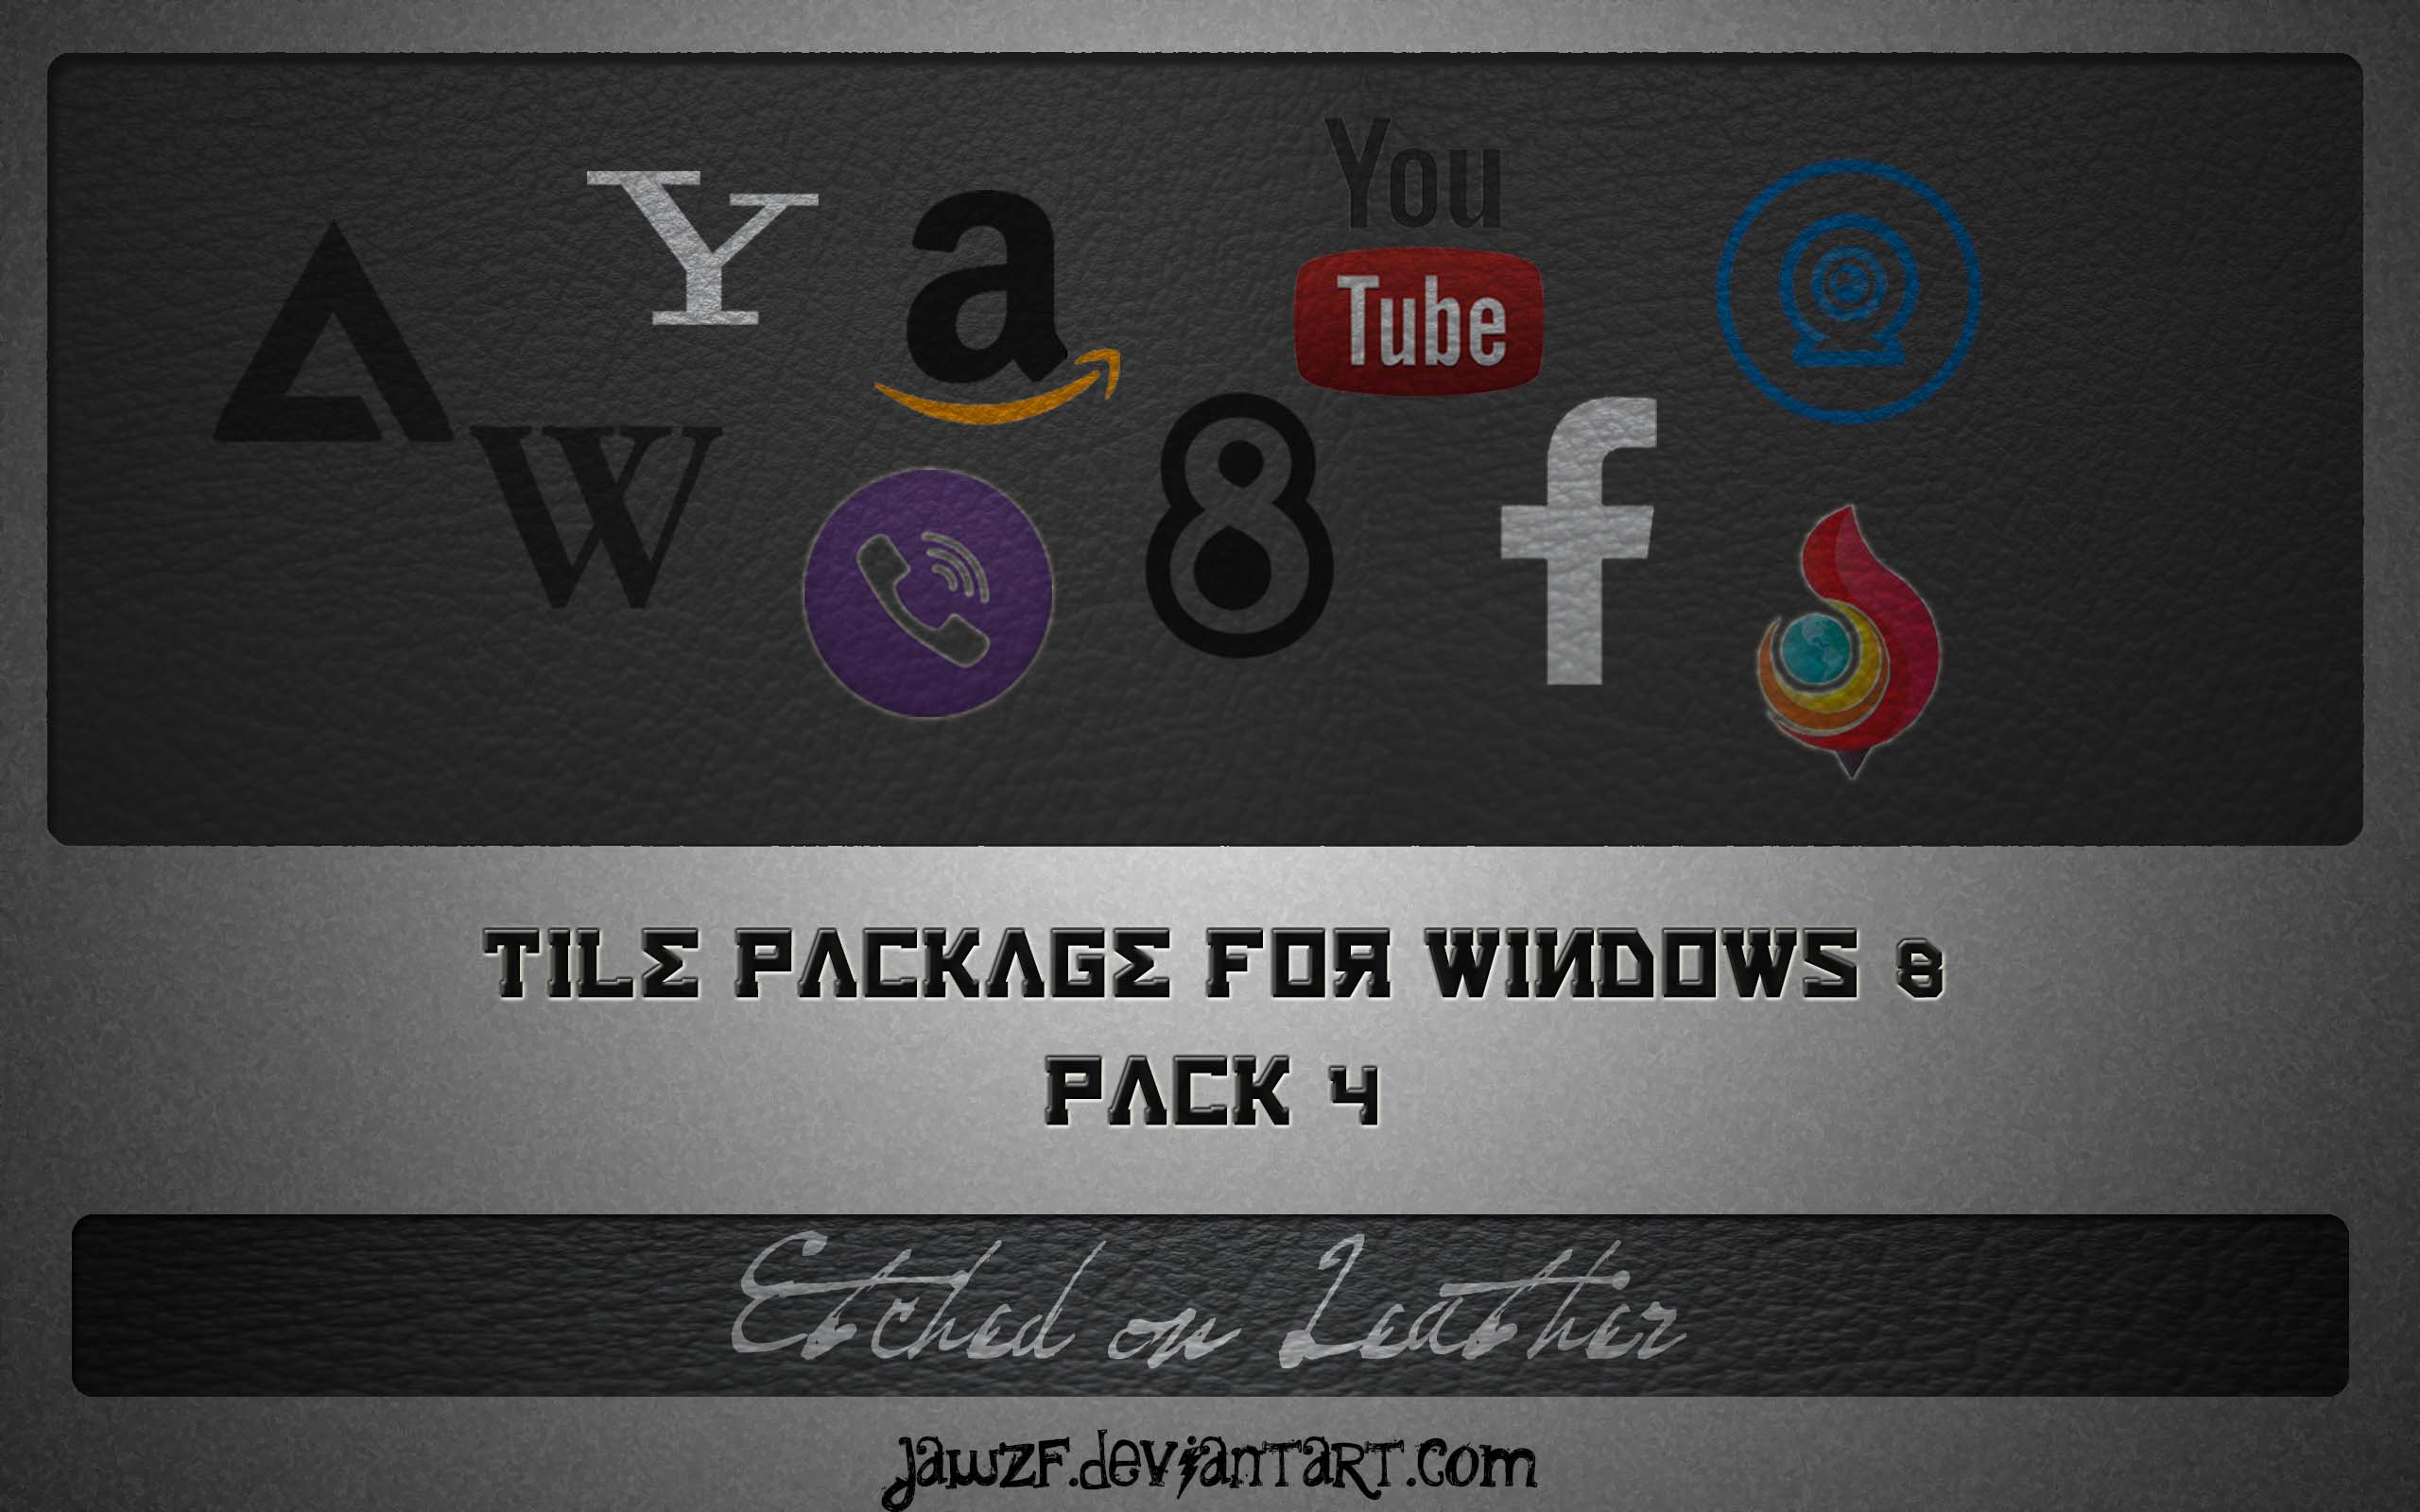 Tile Package 4 for Windows 8 - Embossed in Leather